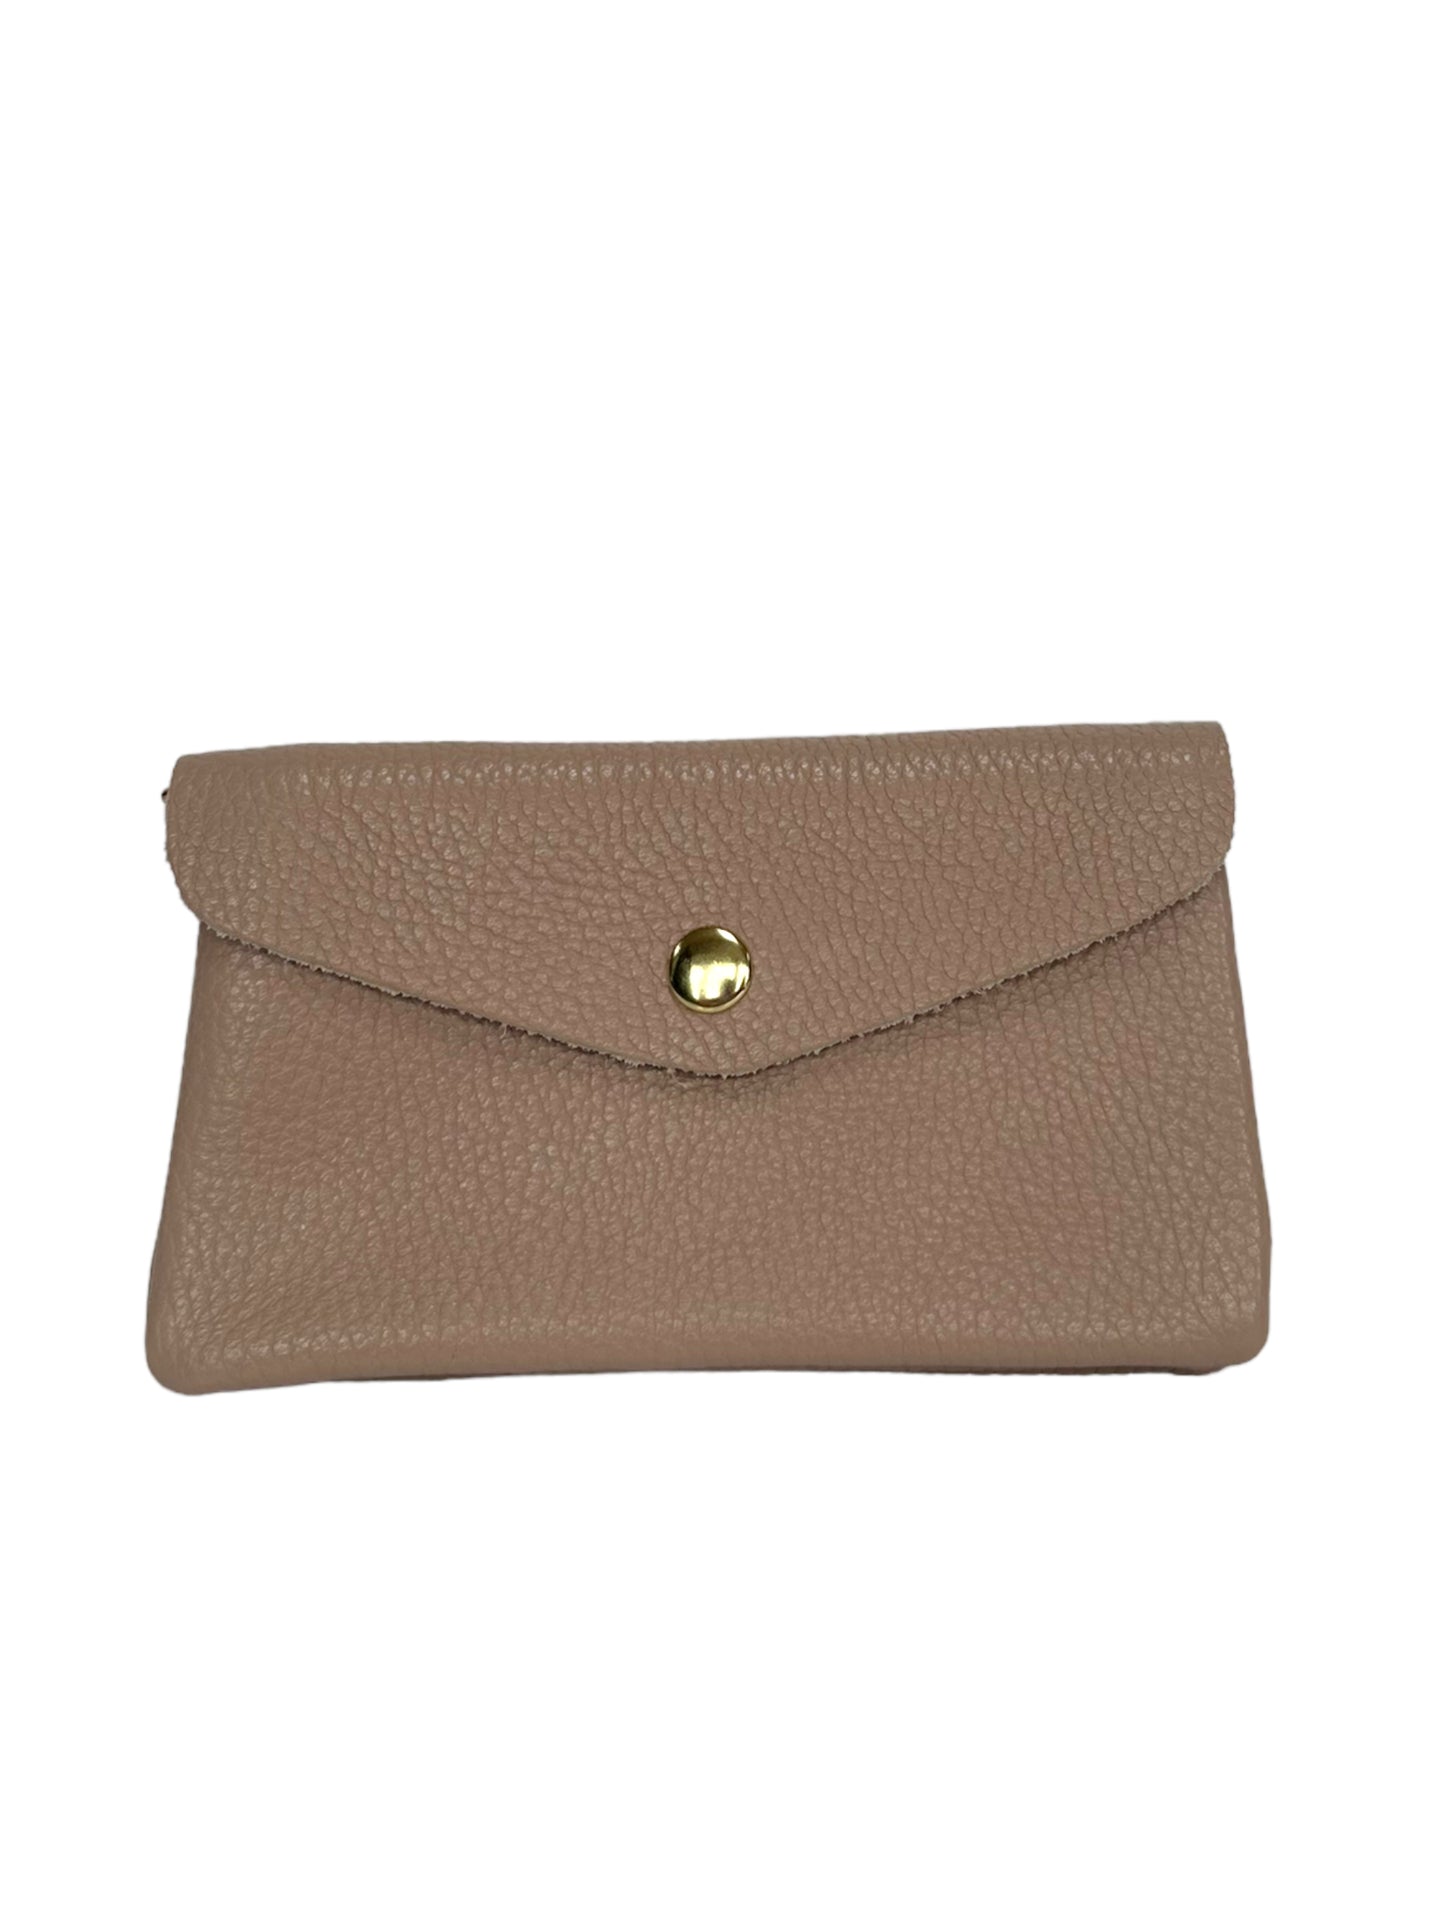 Katie XL - Leather purse with popper